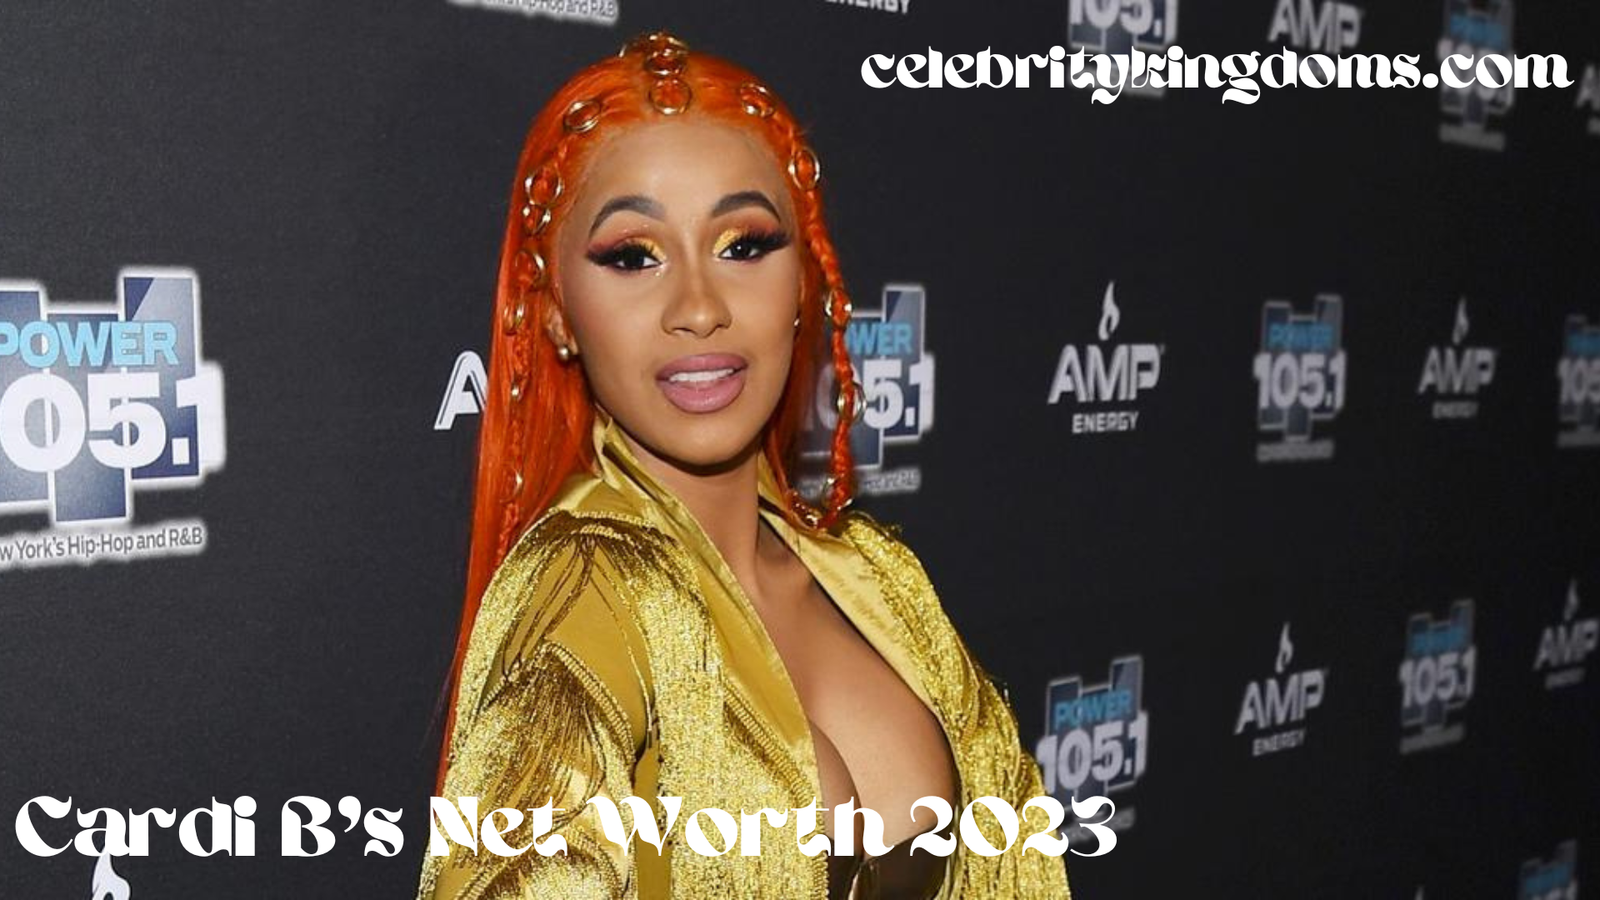 Cardi Bs Net Worth 2023 The Richest Rapper In The World Celebrity Kingdoms